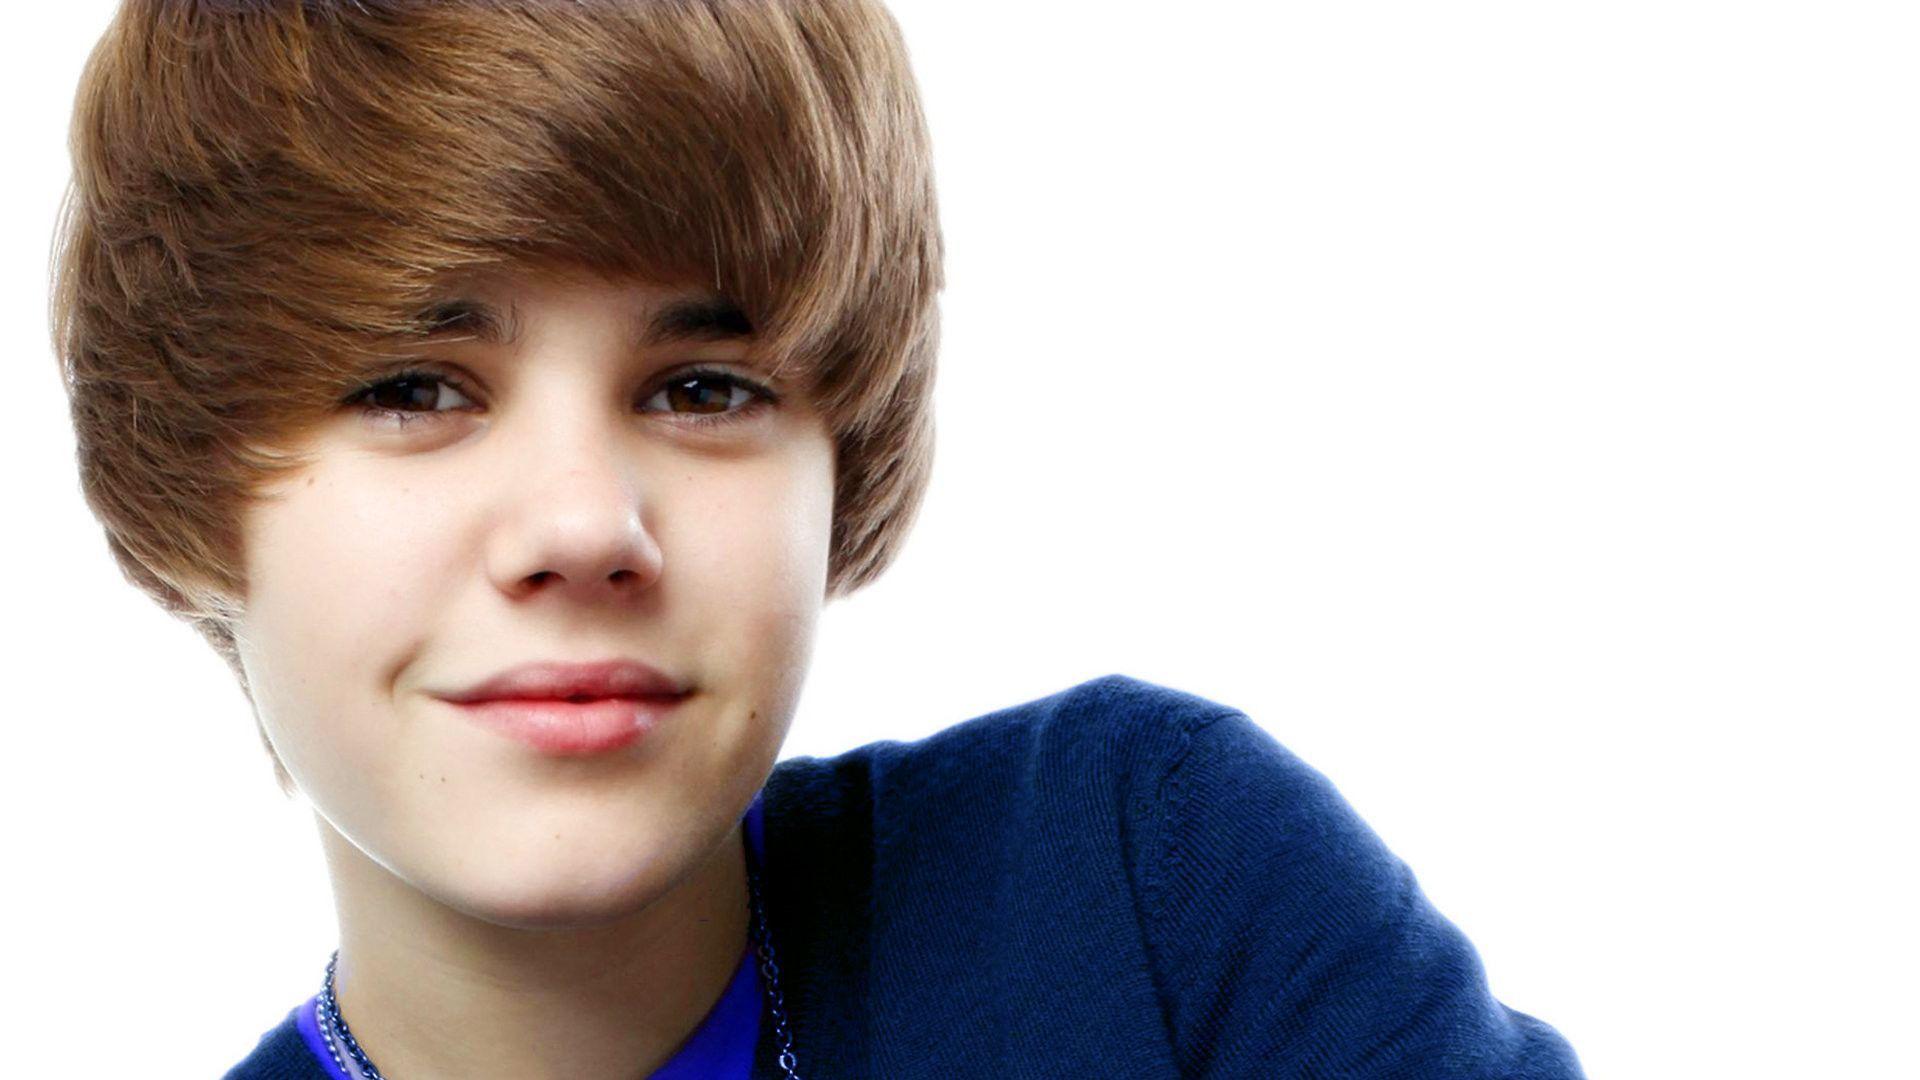 Free Download Pure 100% Justin Bieber HD Wallpaper, Latest Photohoots, Hot Image and more for pc,. Justin bieber wallpaper, Justin bieber, Justin bieber photo